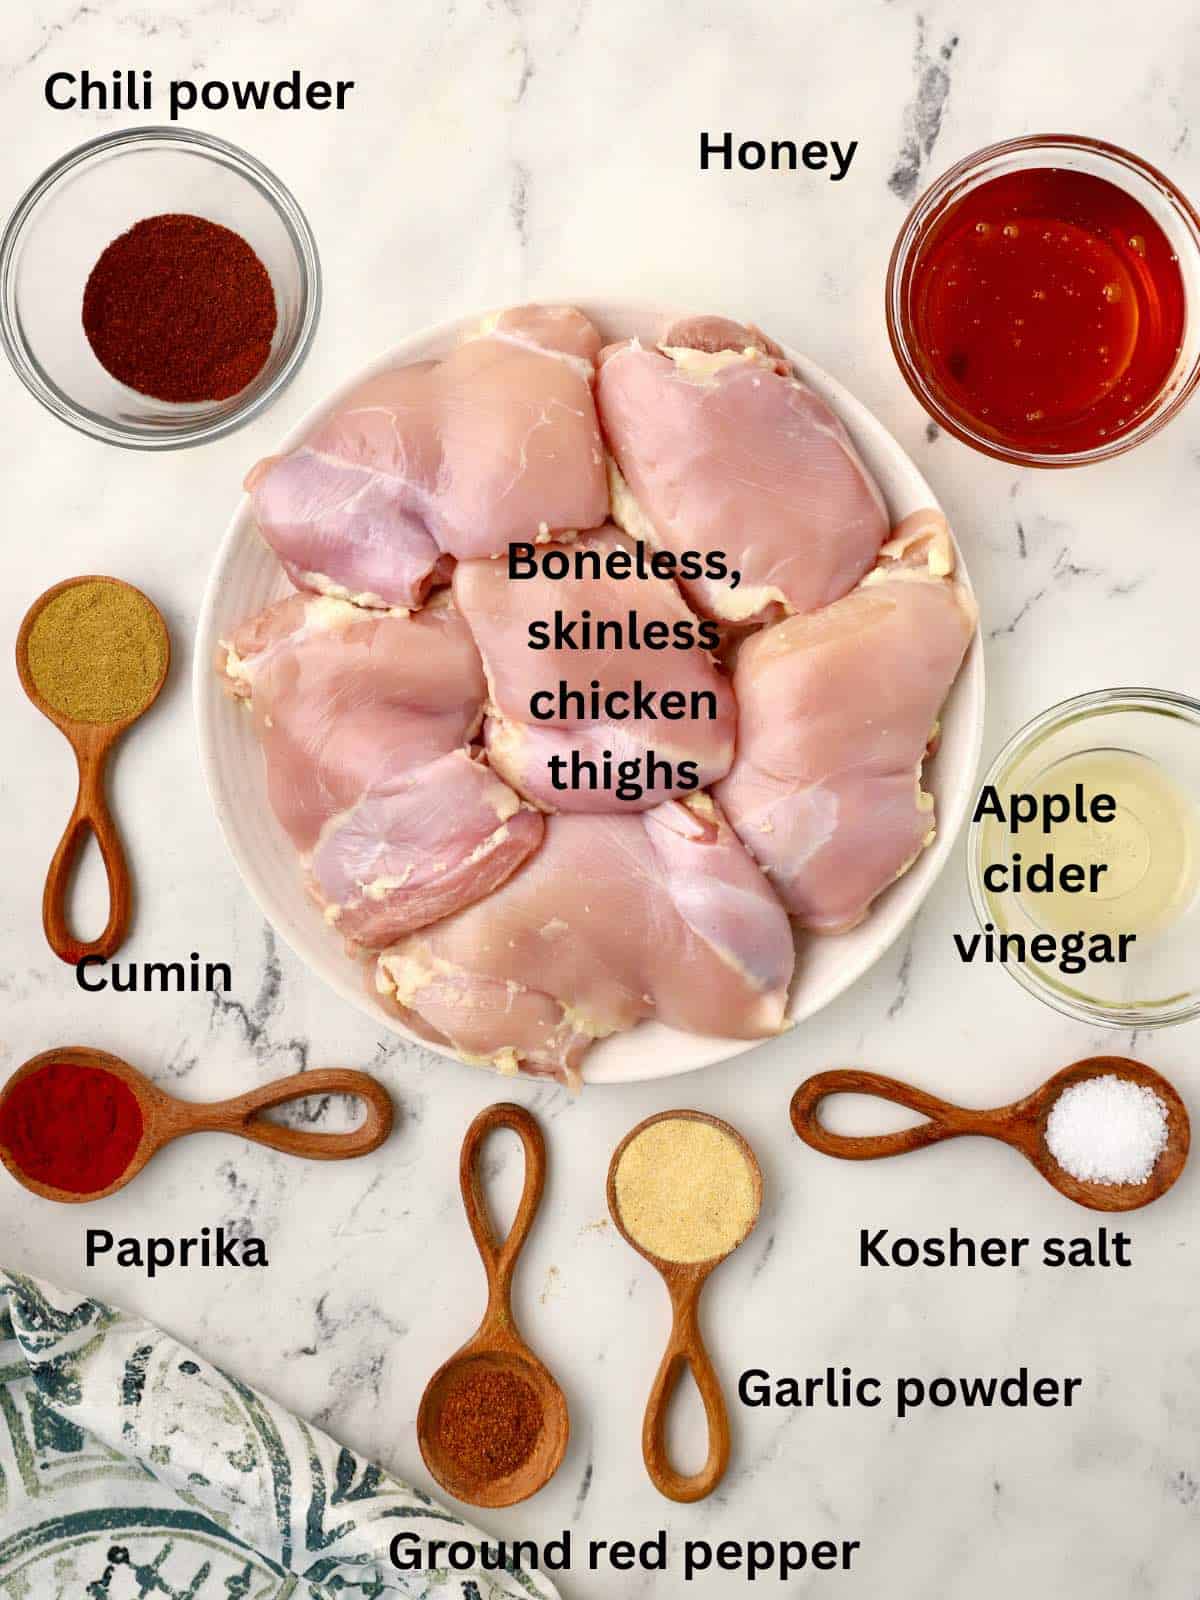 Ingredients for broiled chicken thighs including spices, honey, and apple cider vinegar. 